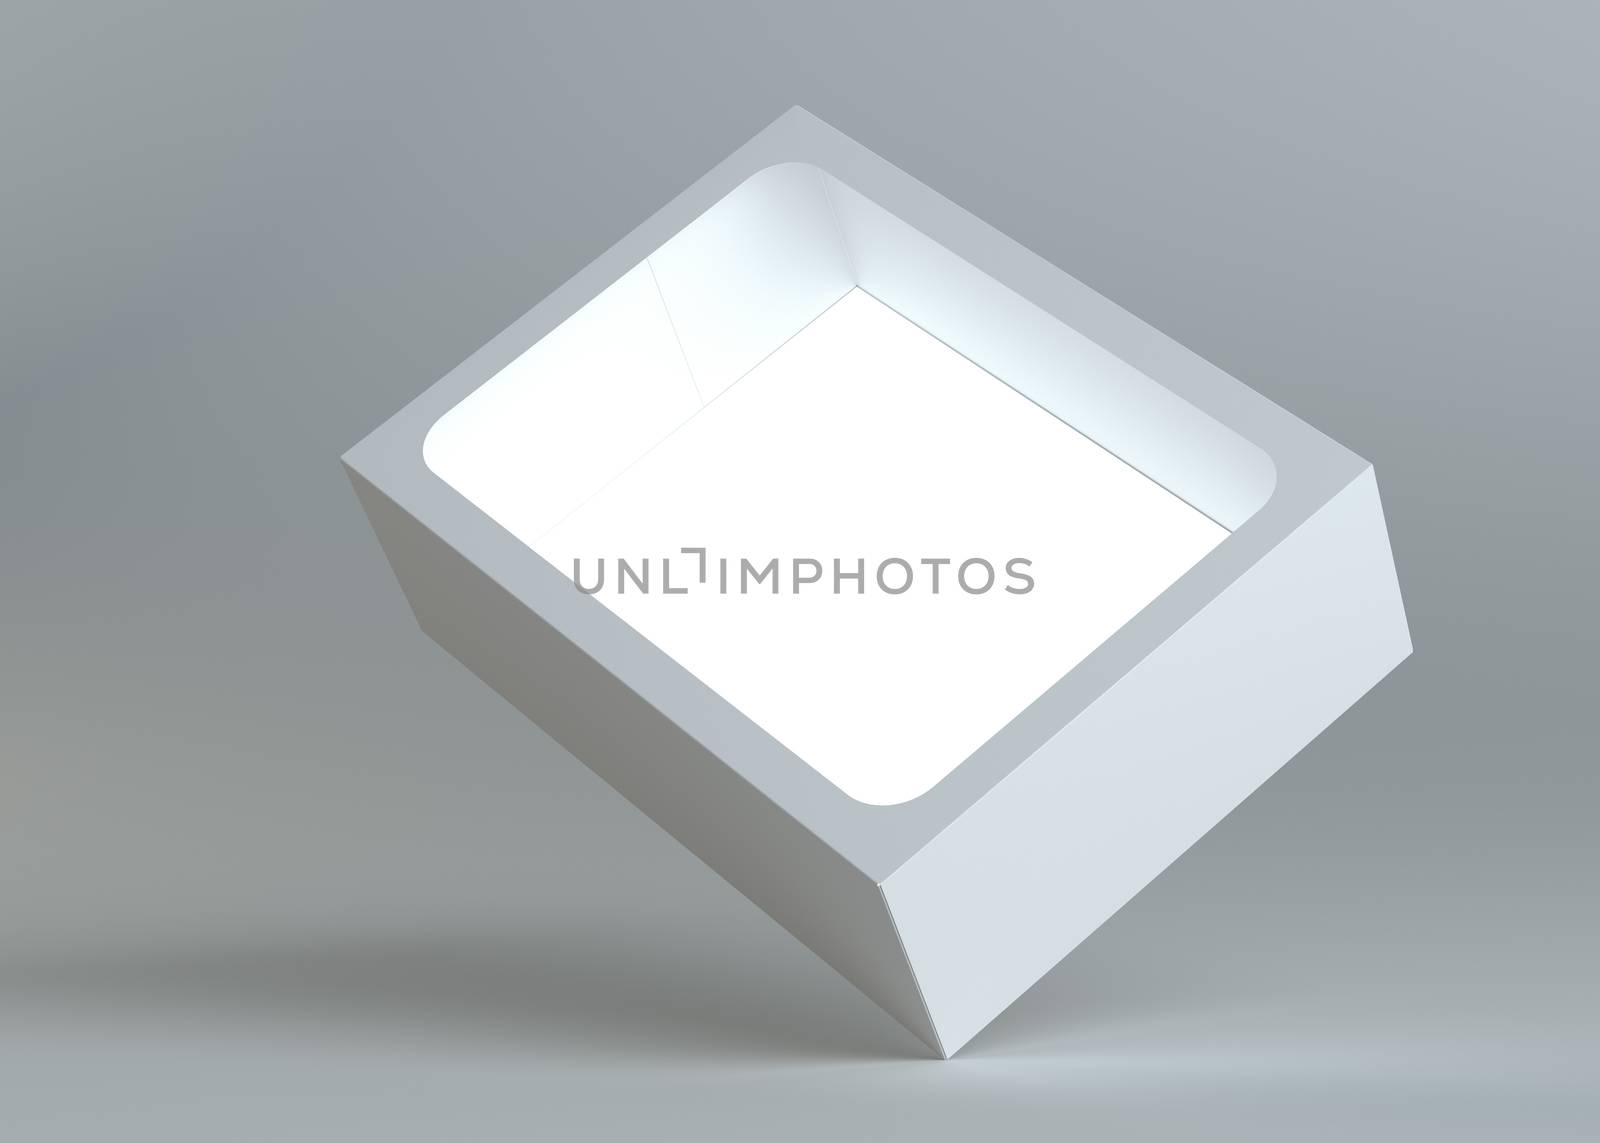 A realistic white empty packaging cardboard box for products - cosmetics, electronics, food, books and more. Gray background. 3d illustration